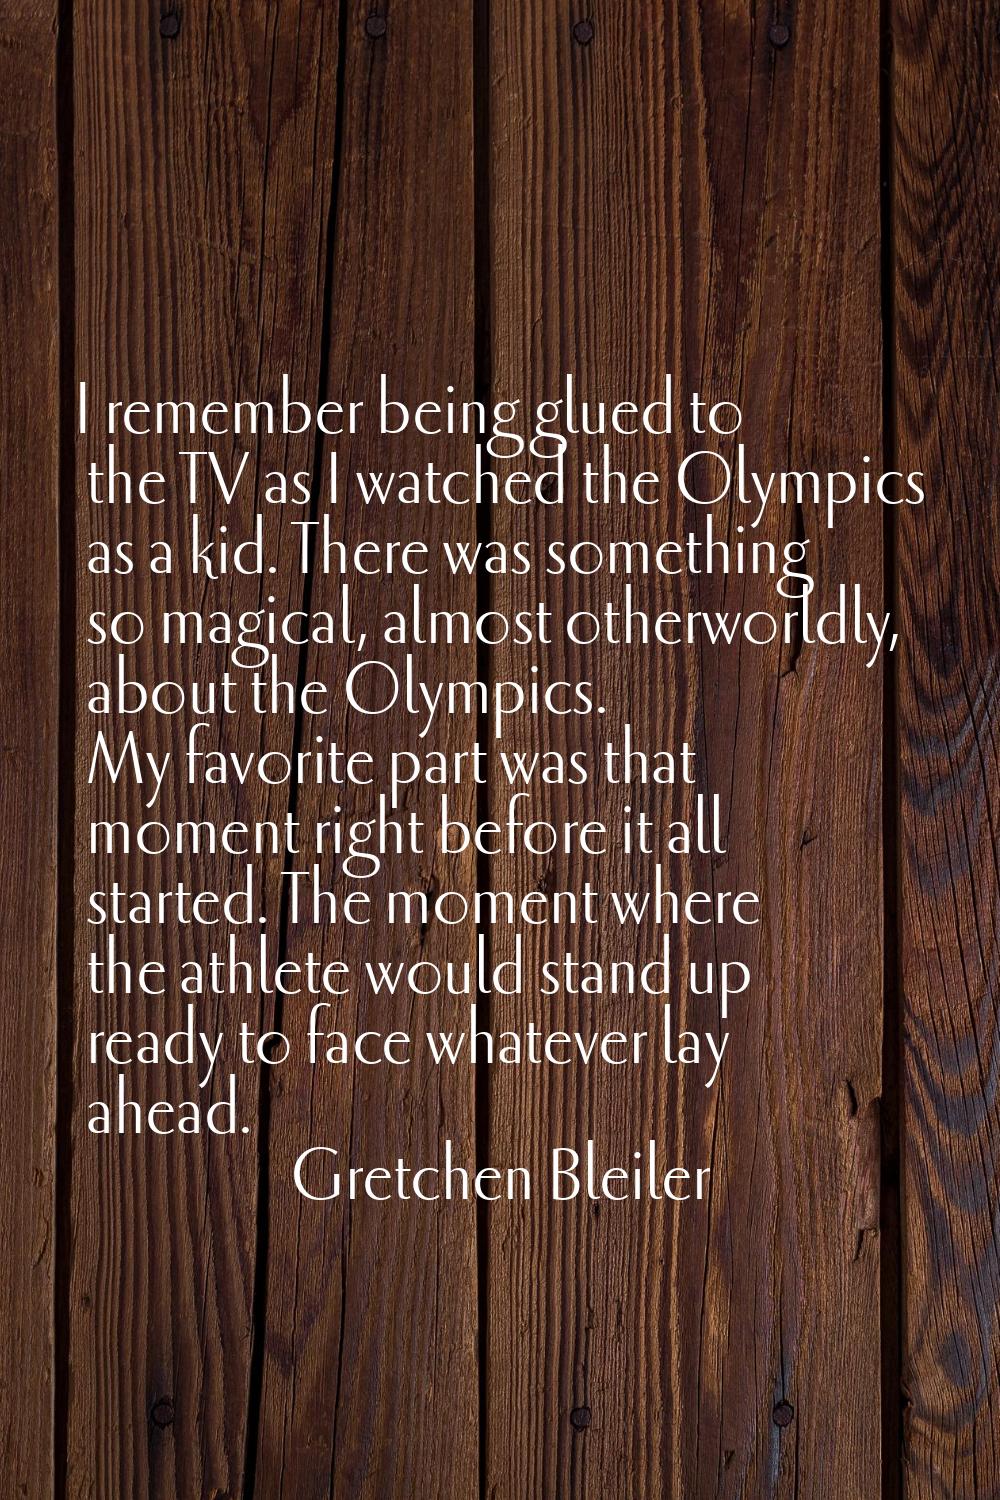 I remember being glued to the TV as I watched the Olympics as a kid. There was something so magical